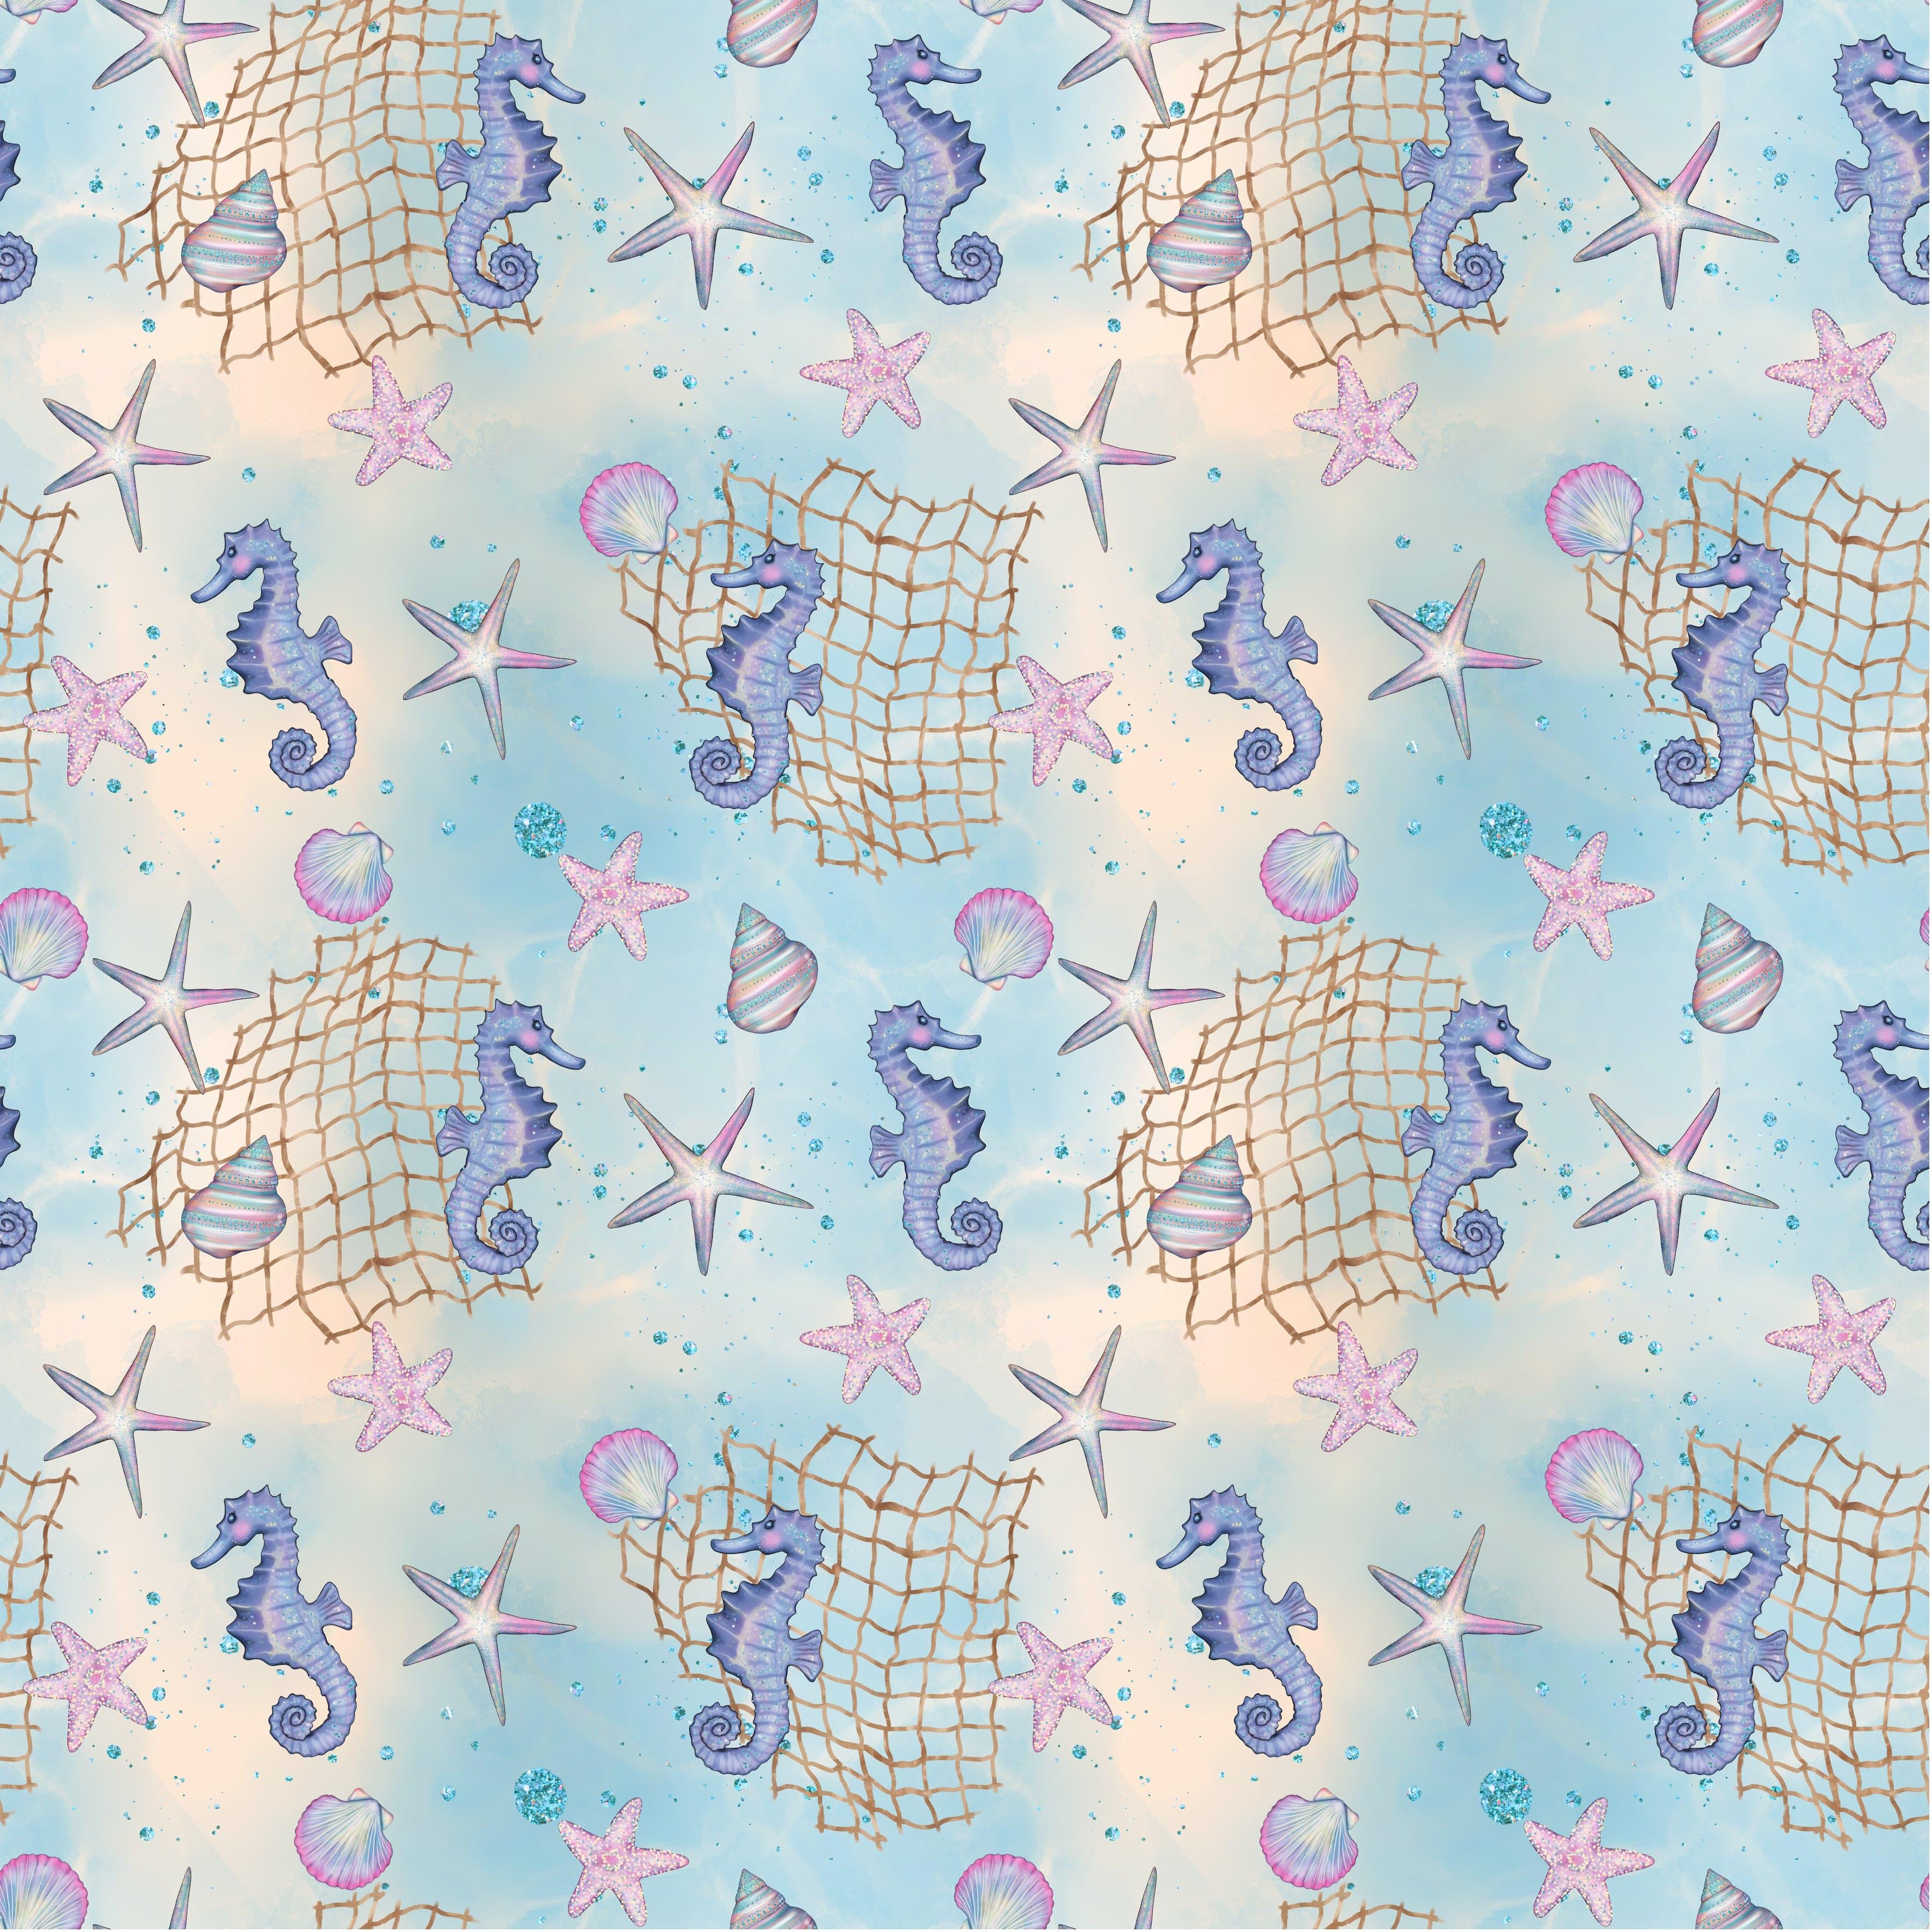 Gaynor Carradice's Mermaids & Seashells Collection Seahorse Shuffle 12 x 12 Double-Sided Scrapbook Paper by SSC Designs - Scrapbook Supply Companies